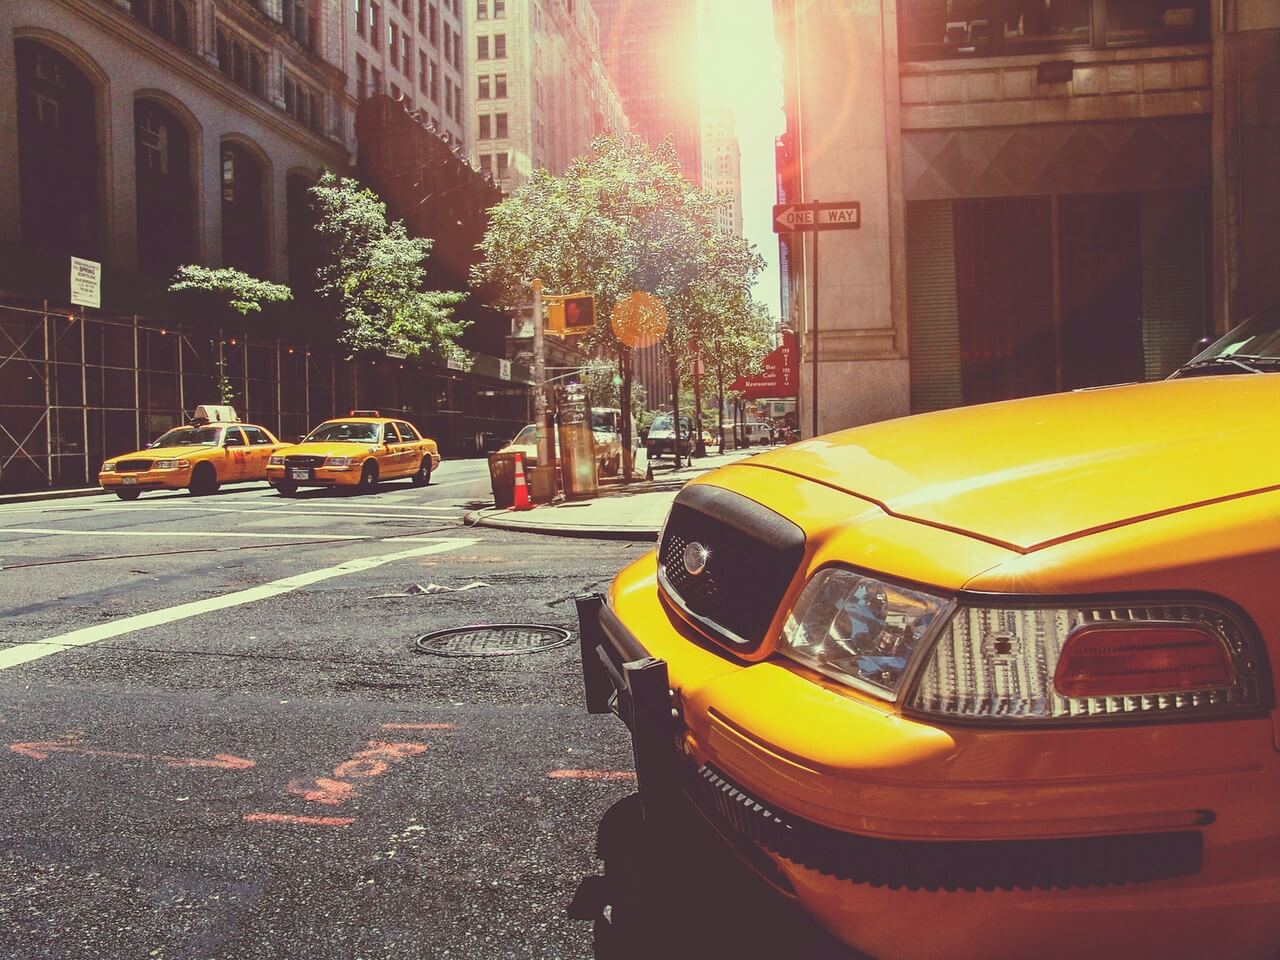 Hailing cabs: things to know before traveling to New York